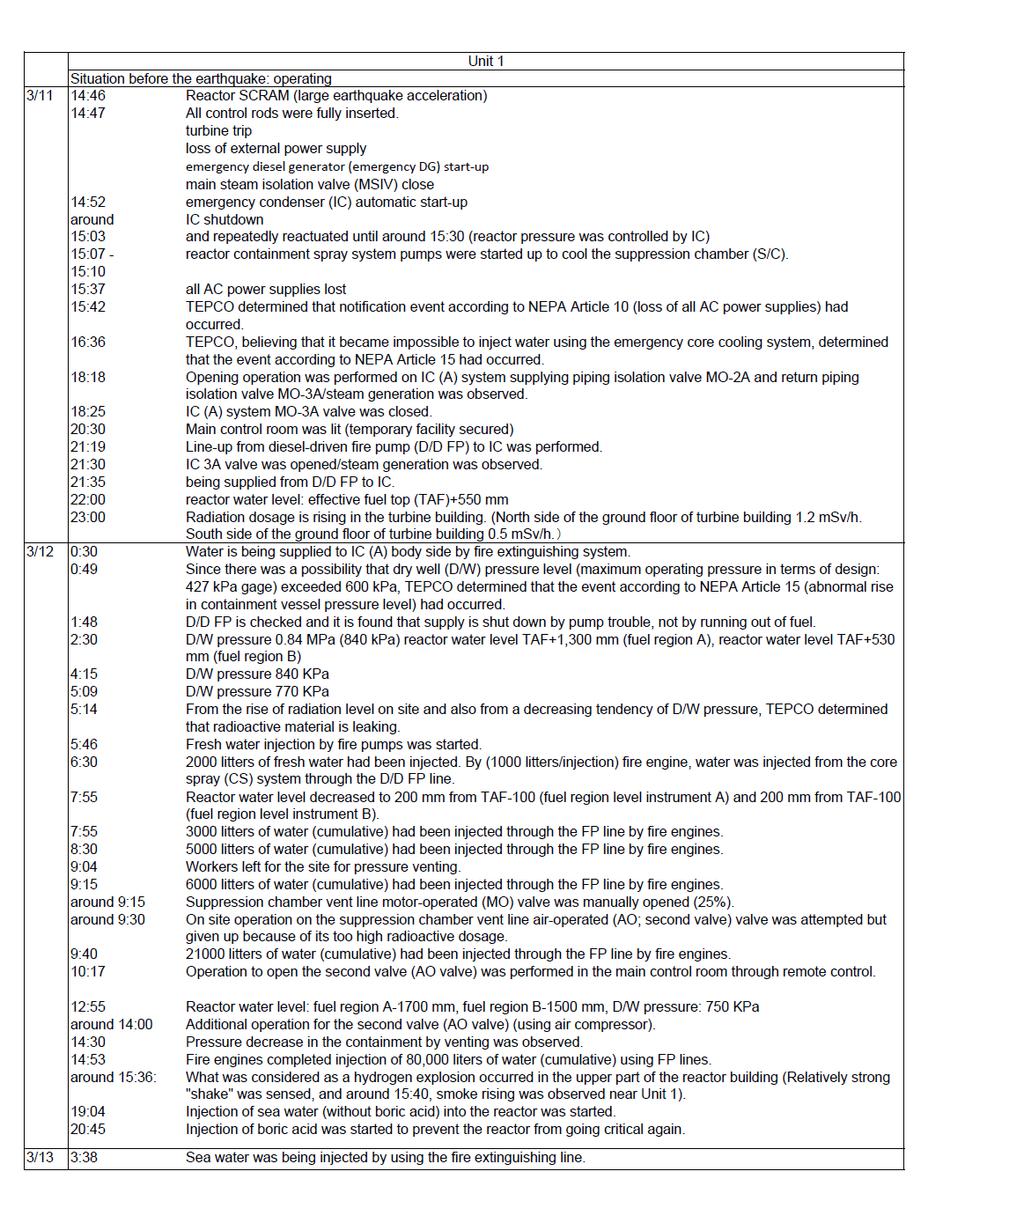 Table IV-5-1 Fukushima Daiichi NPS, Unit 1 Main Chronology (Provisional) * The information included in the table is subject to modifications following later verification.